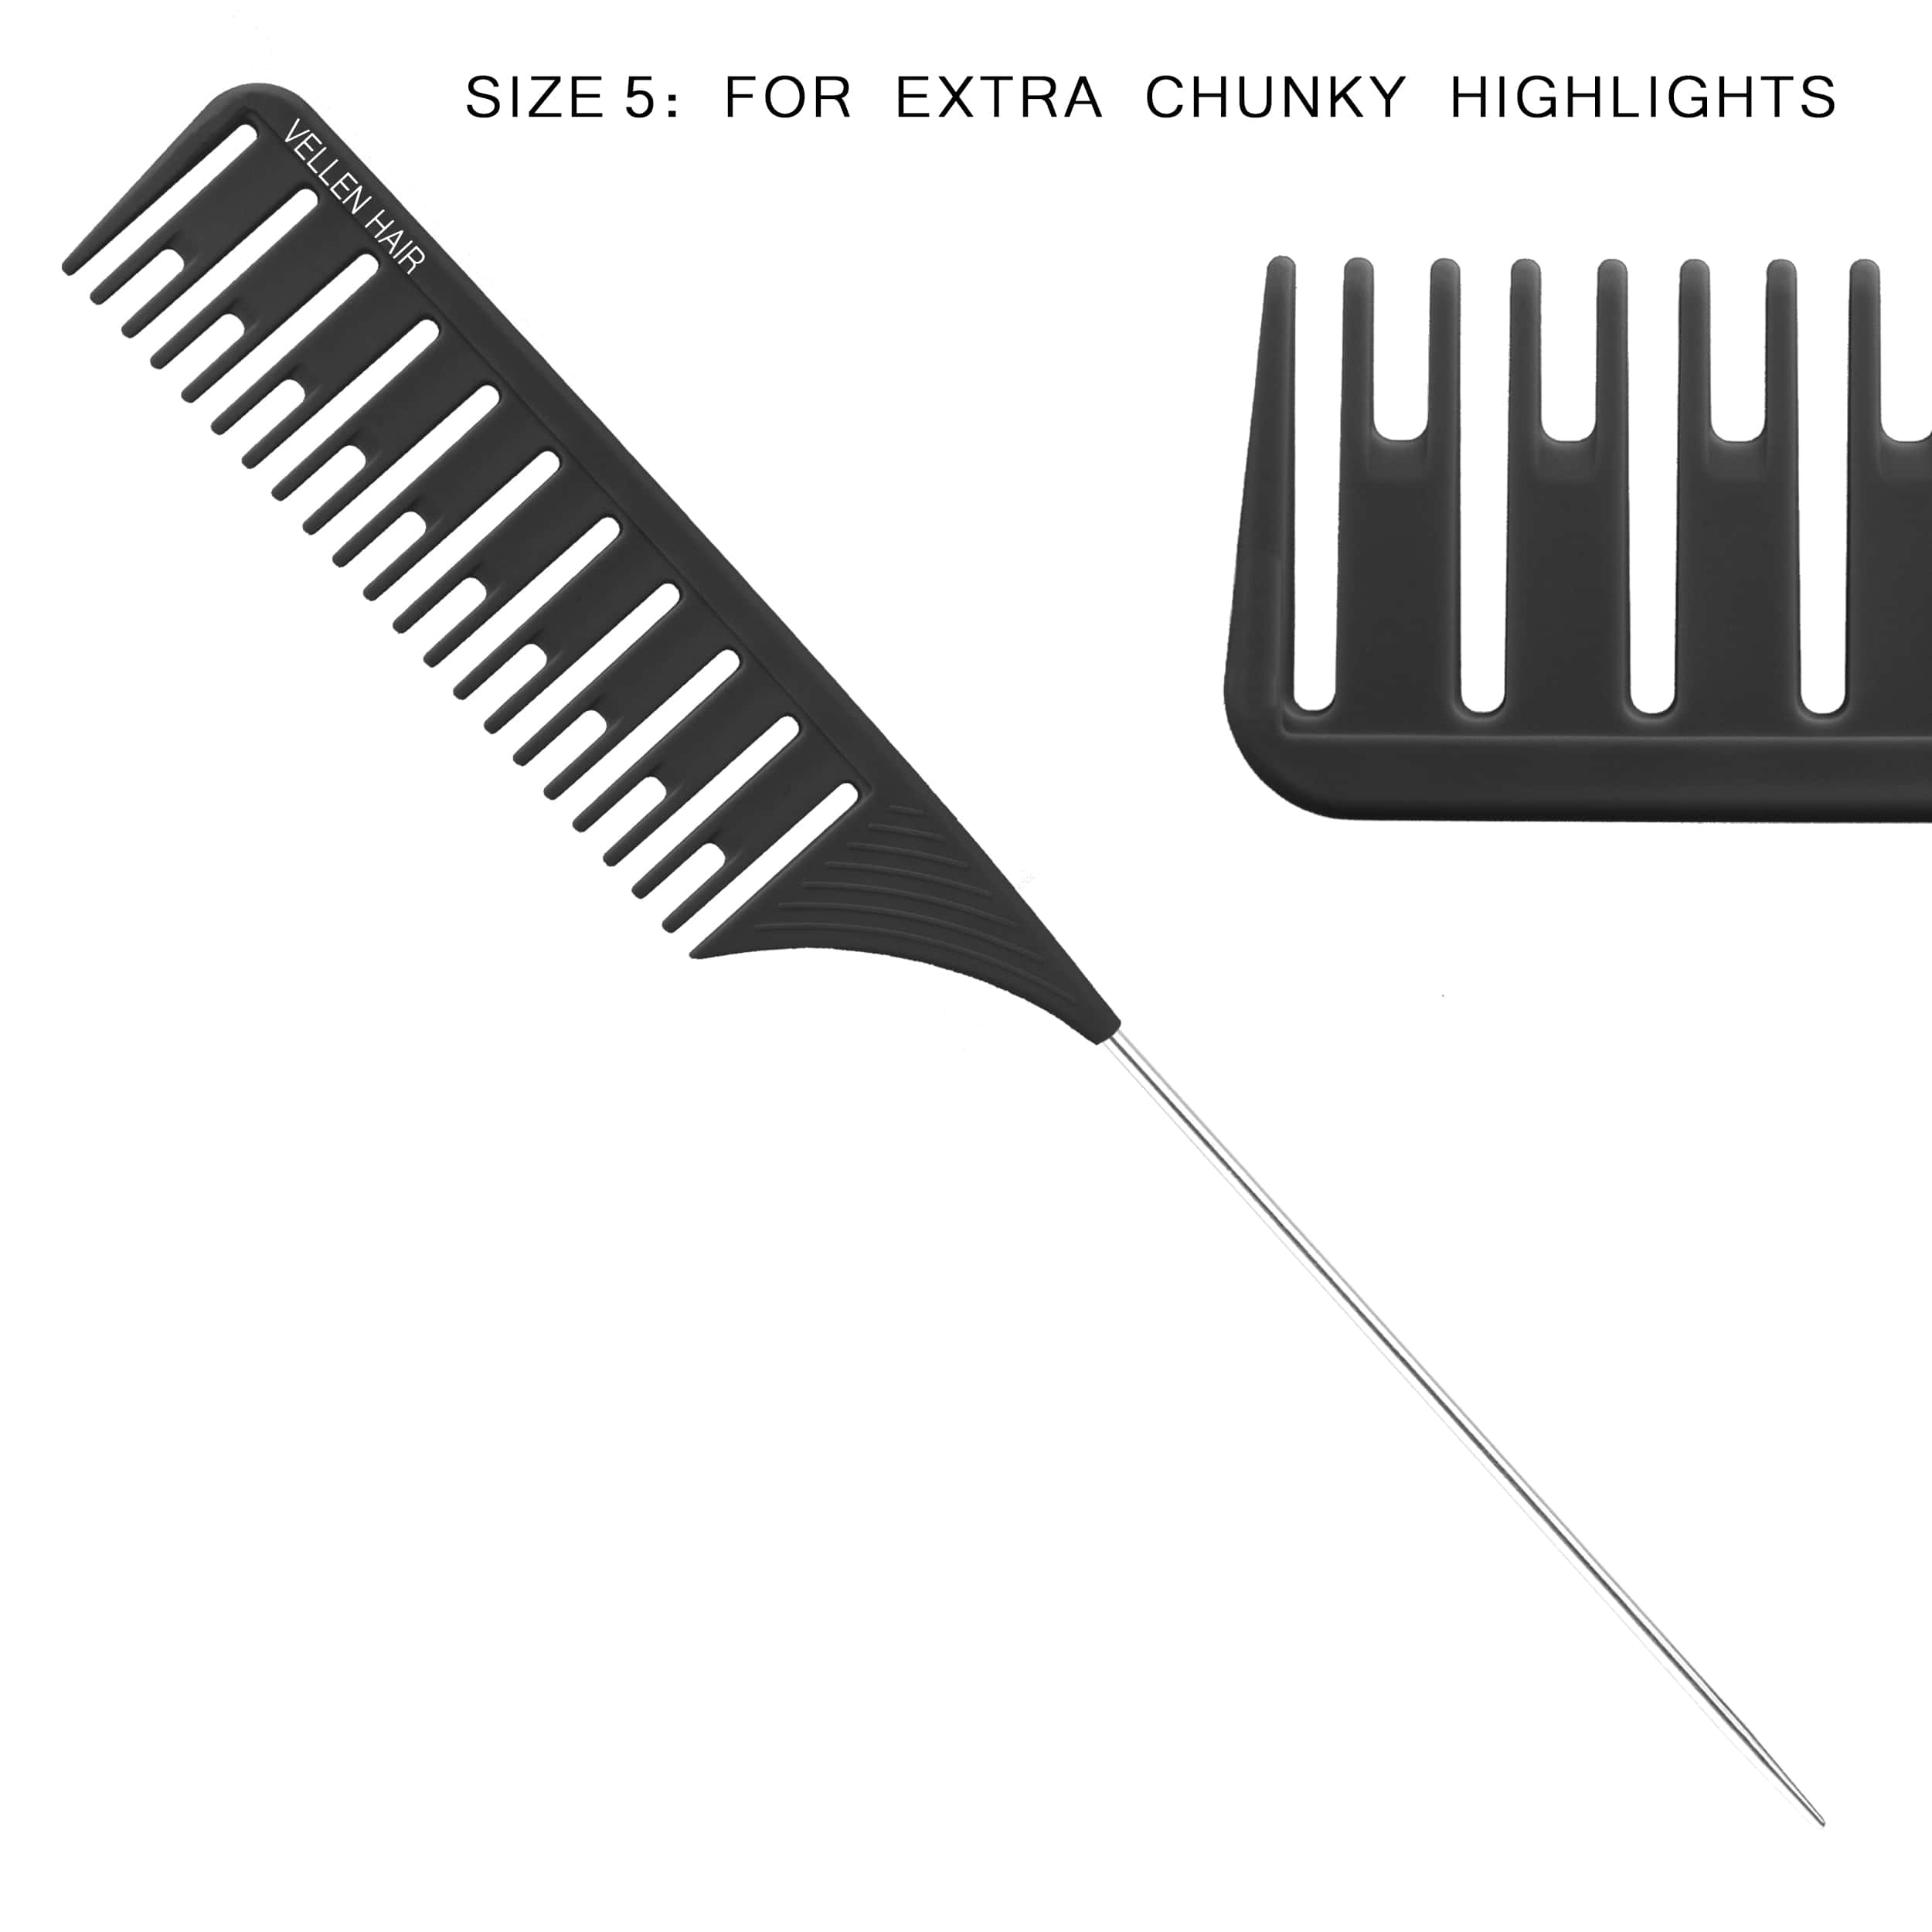 Ultimate Highlighting Comb Set 2.0 - 5 Sizes Black